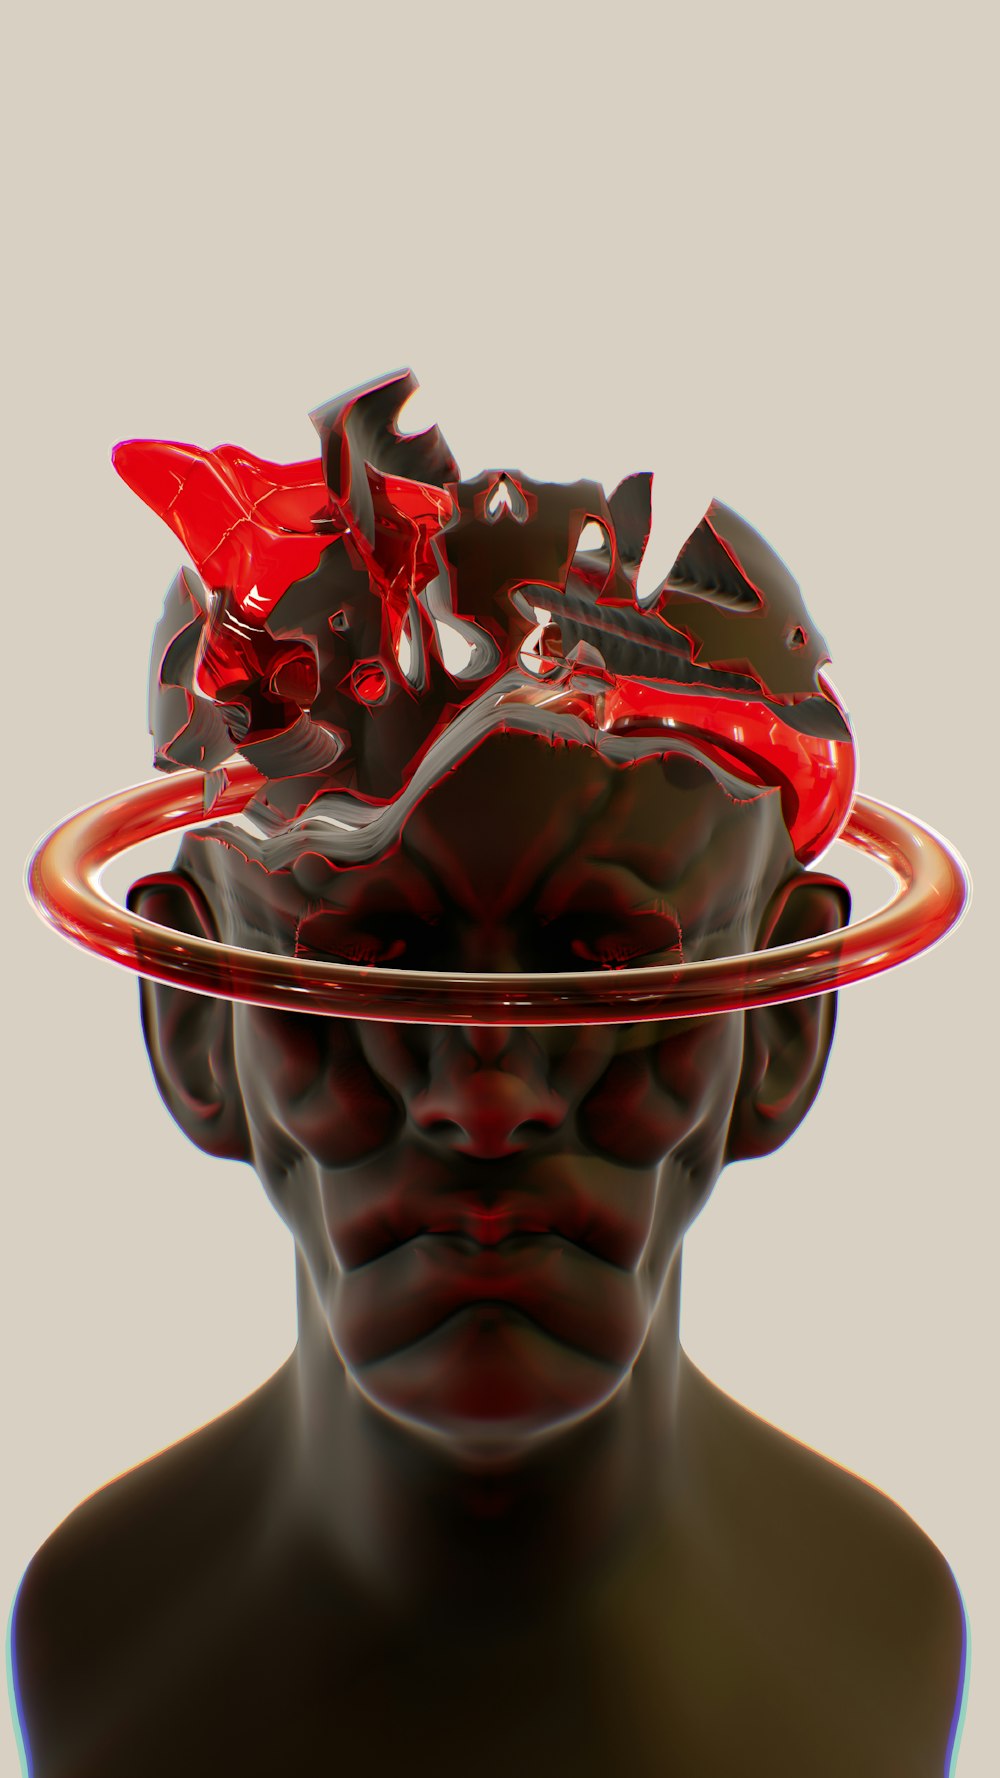 a man's head with a red object on top of it